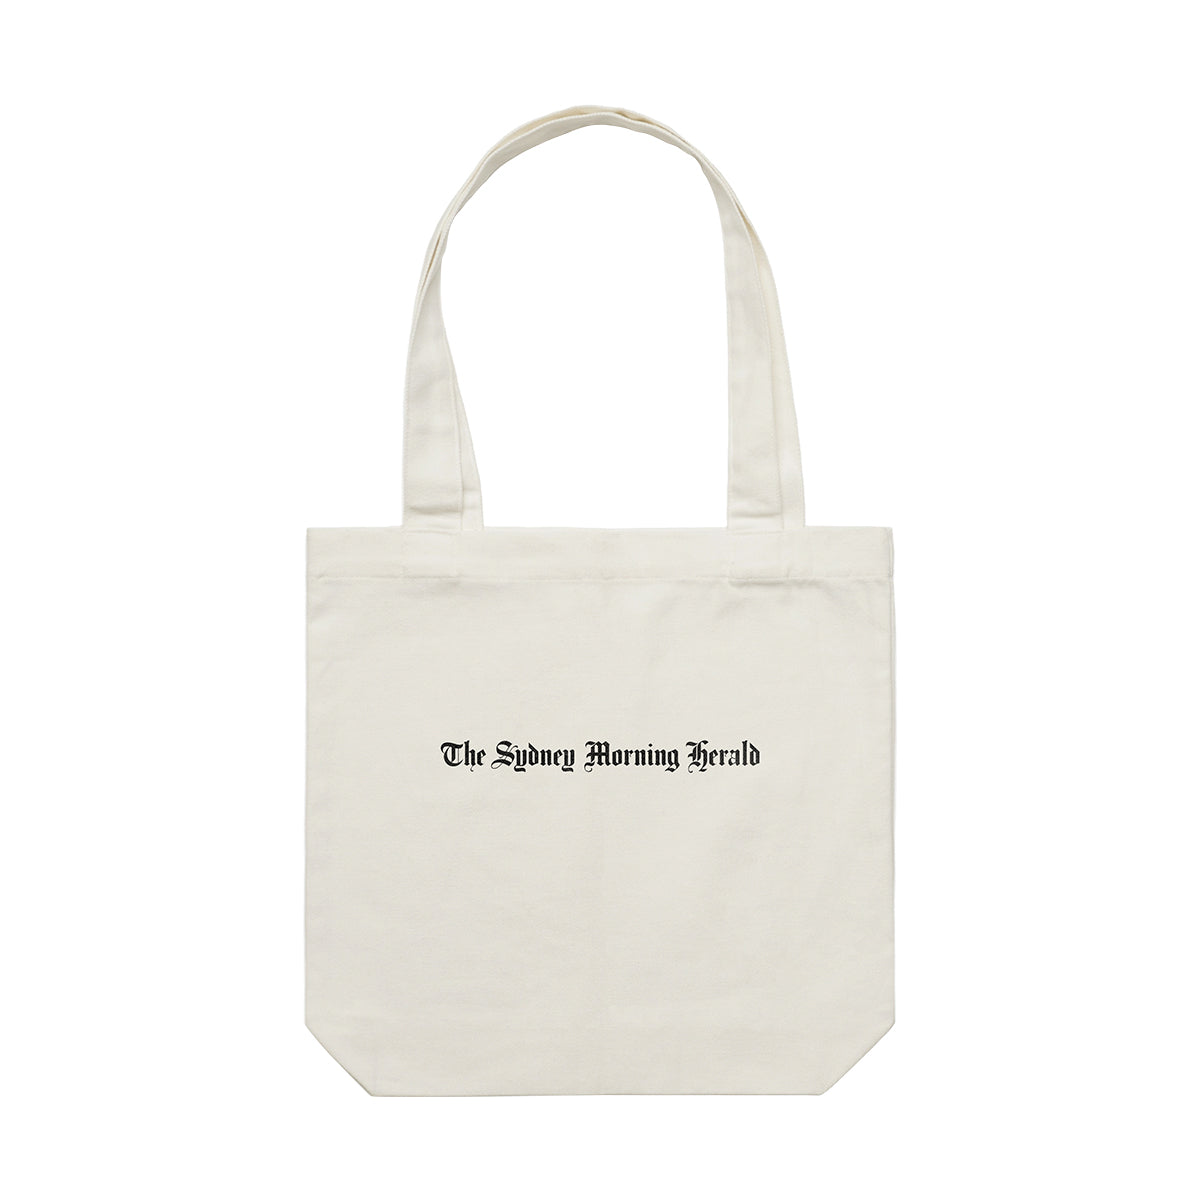 The Sydney Morning Herald Tote Bag